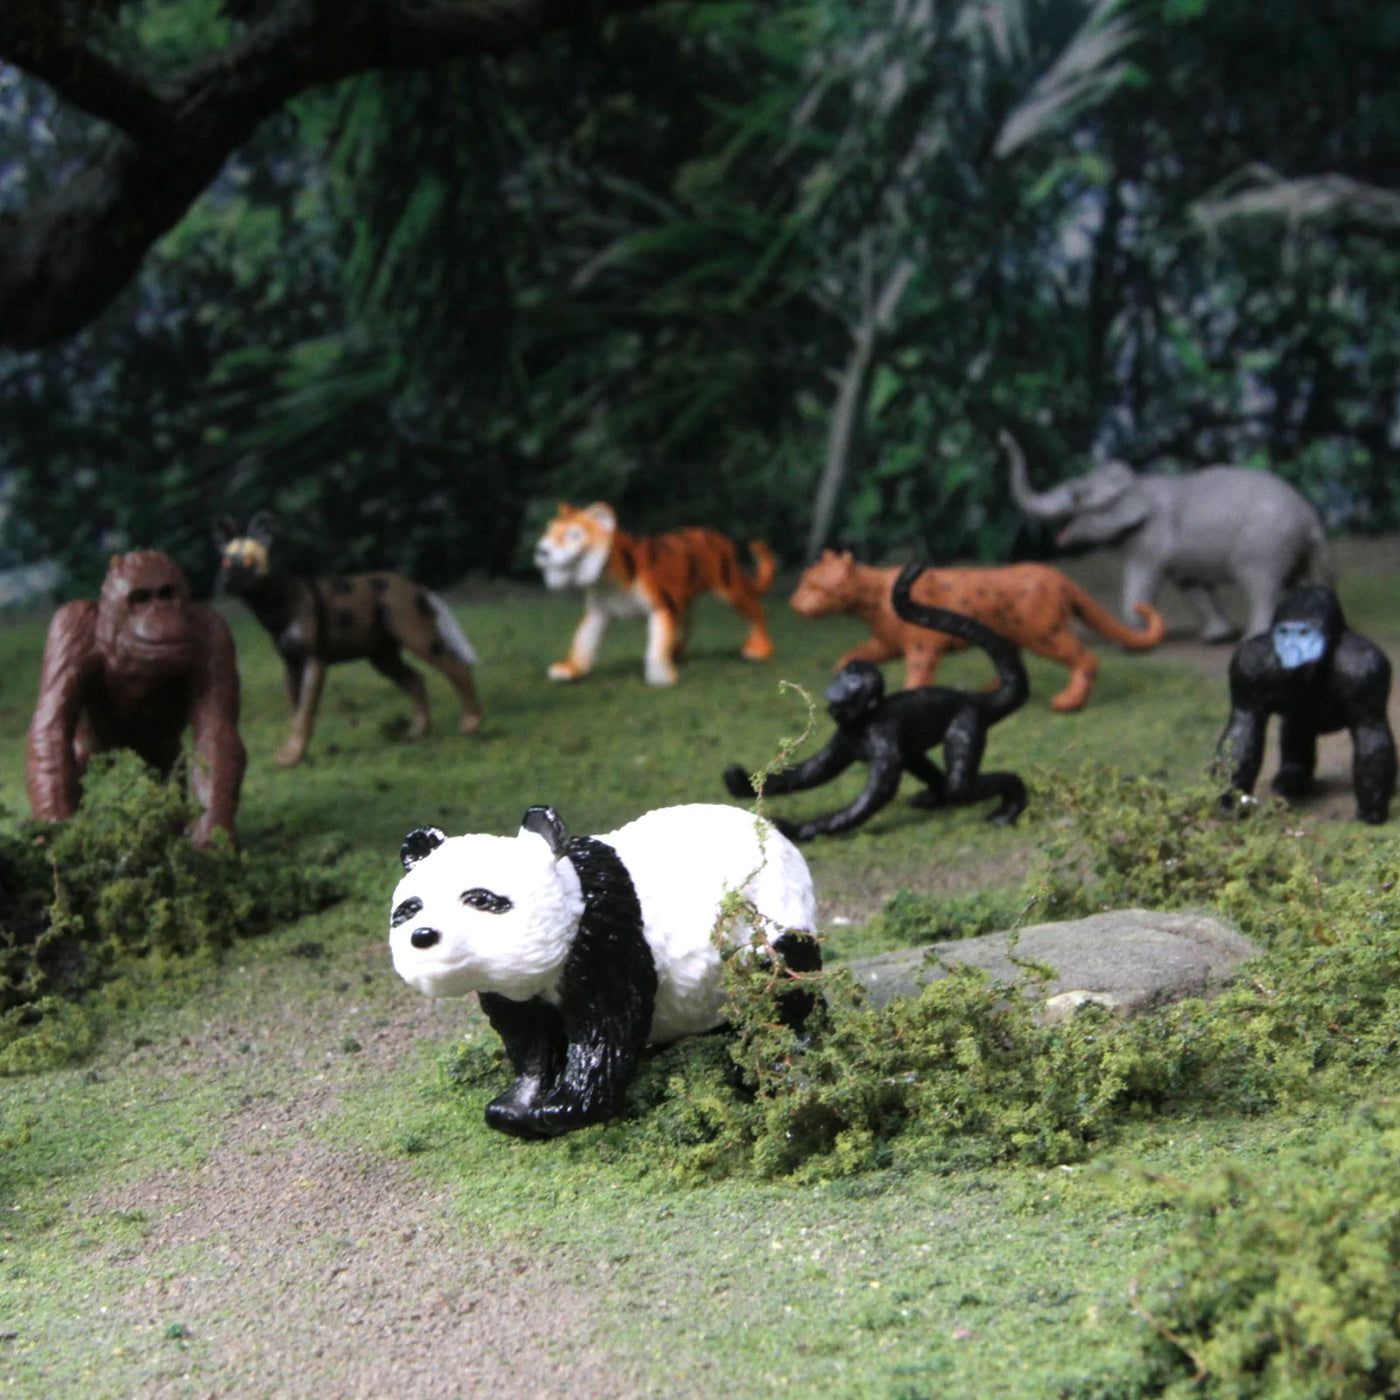 Endangered Land Species Toob® Small World Figures